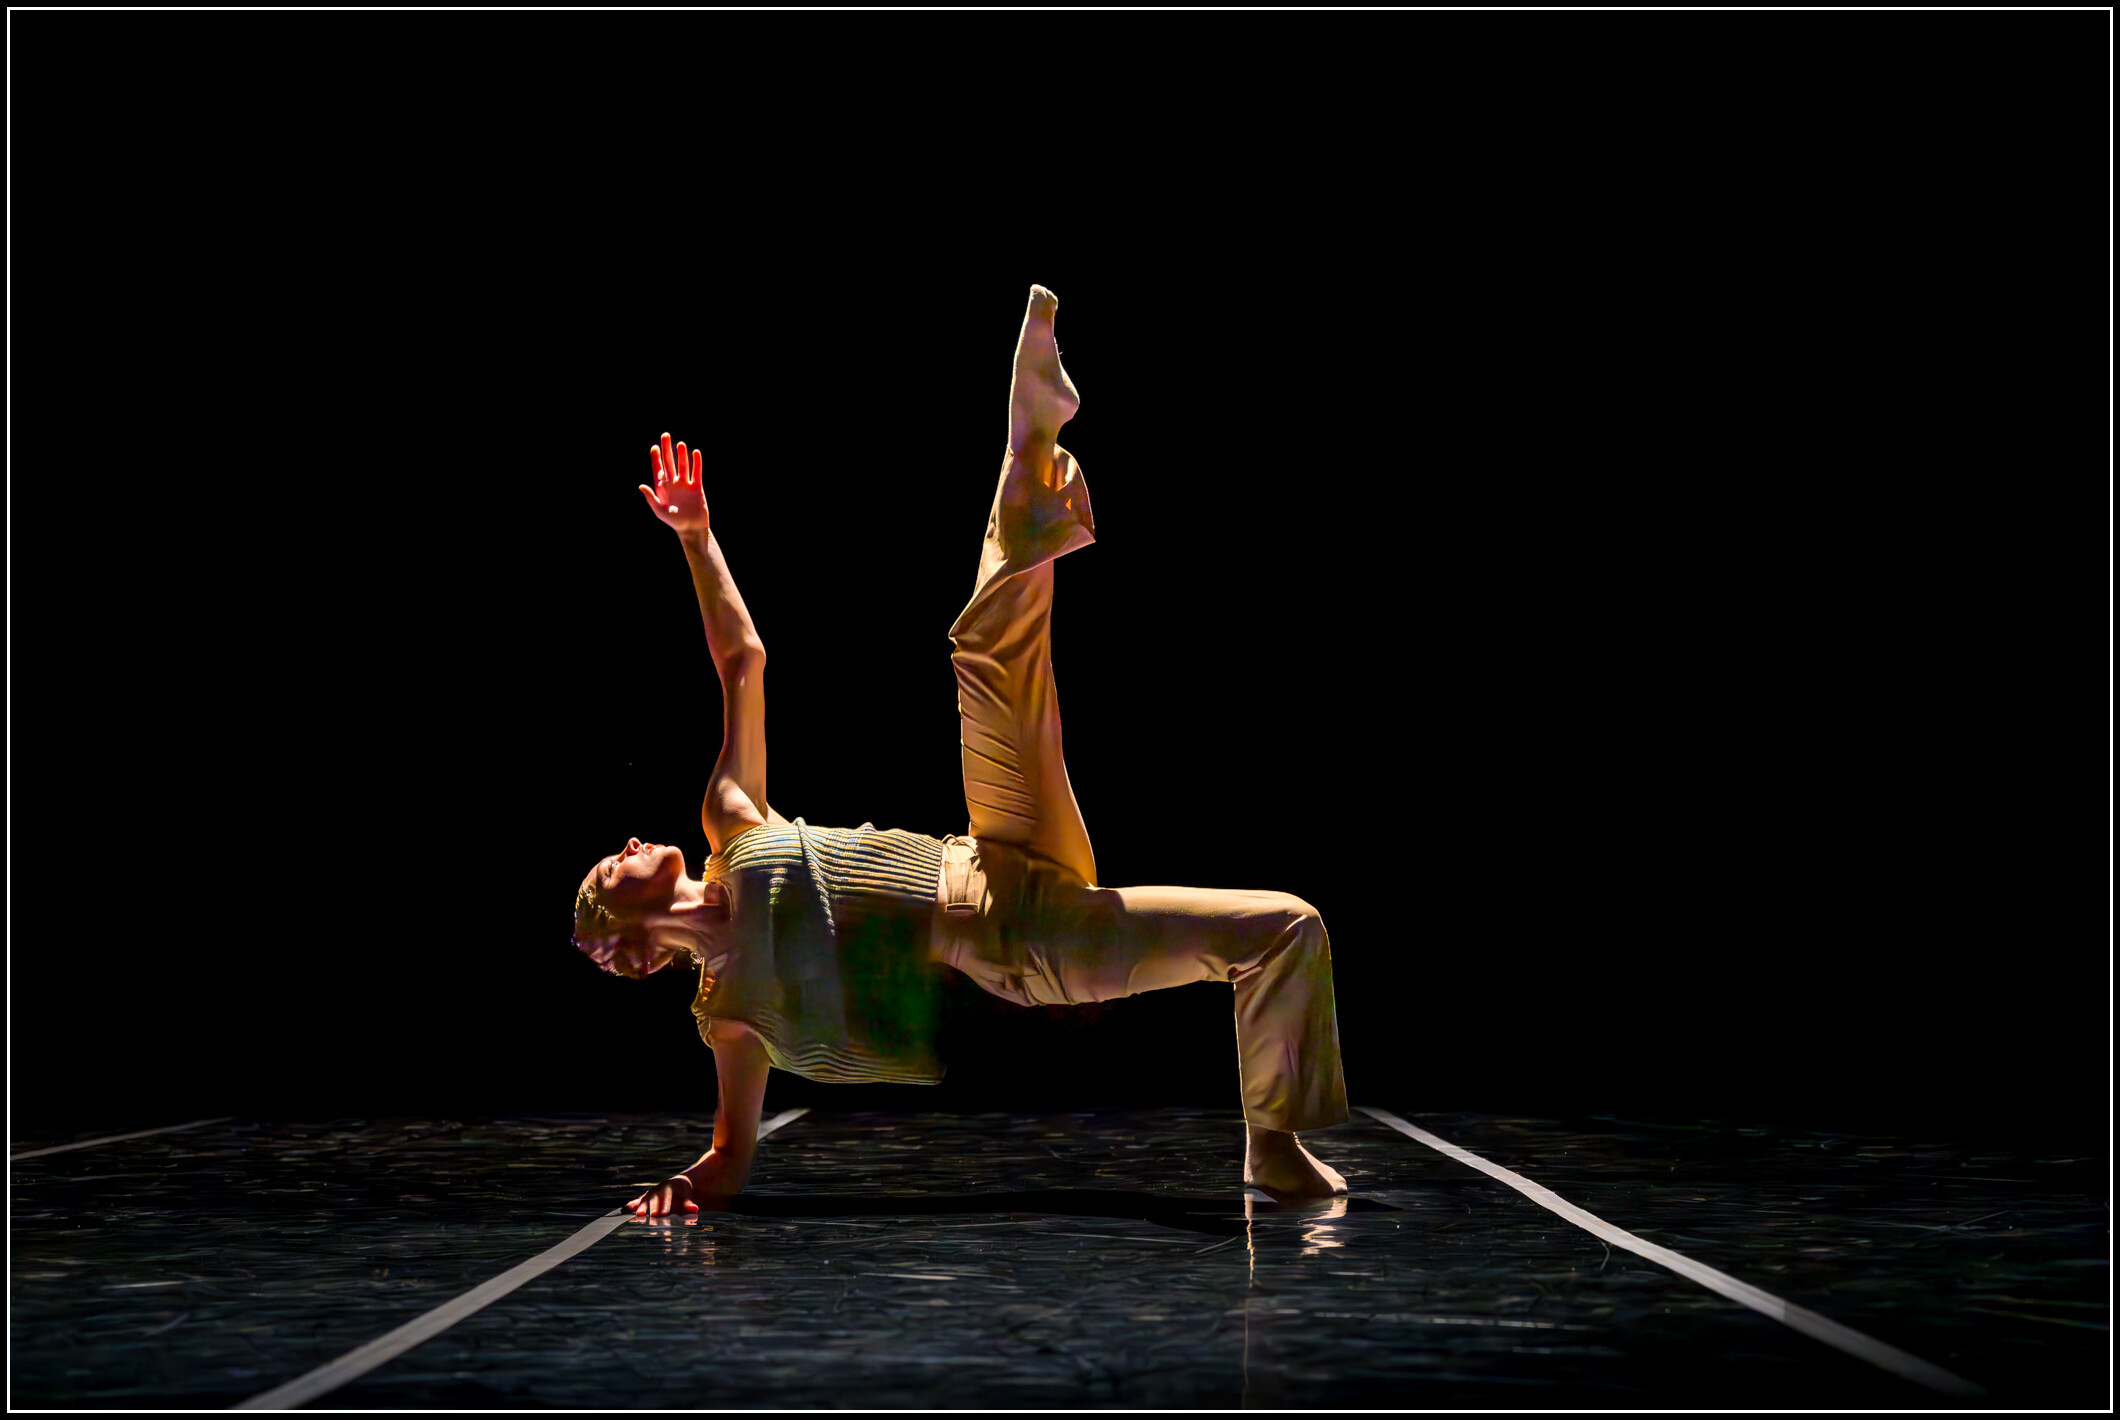 BFA at Dominican student Bailey Storm performing on stage; Bailey is dancing floorwork with one leg extended up into the air; BFA Senior Showcase imagery